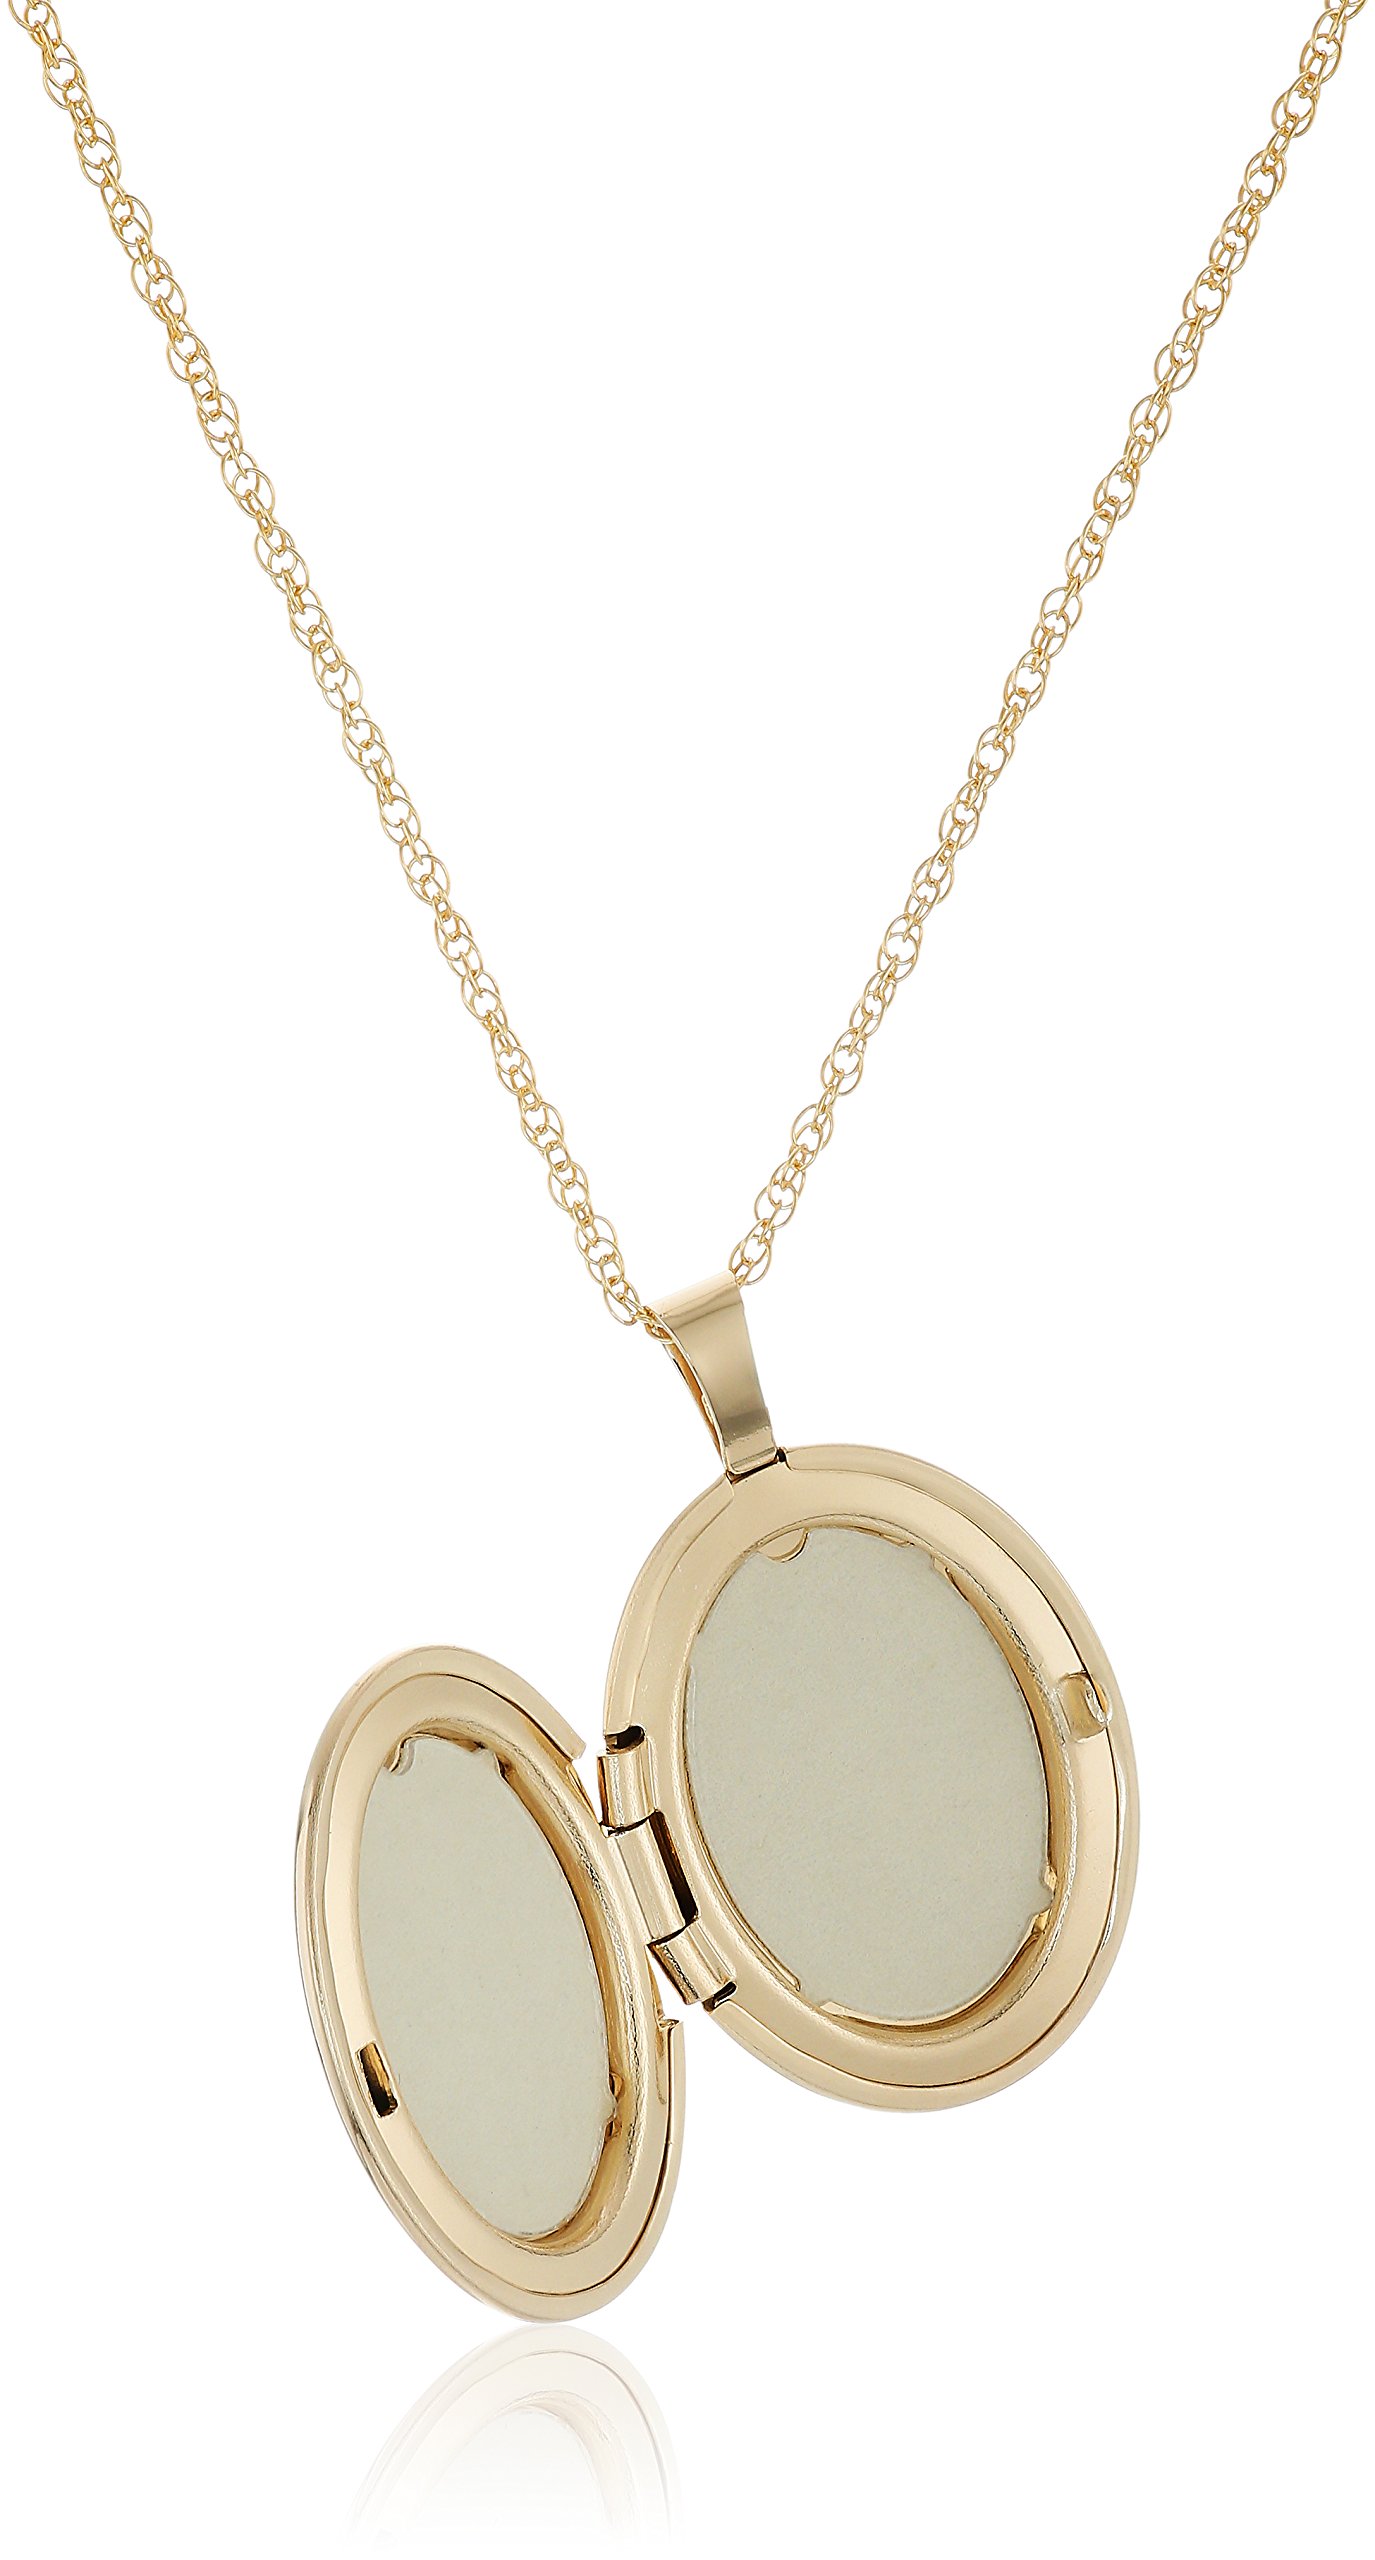 Amazon Collection 14k Gold-Filled Polished Oval Pendant with Genuine Diamond Locket Necklace, 18